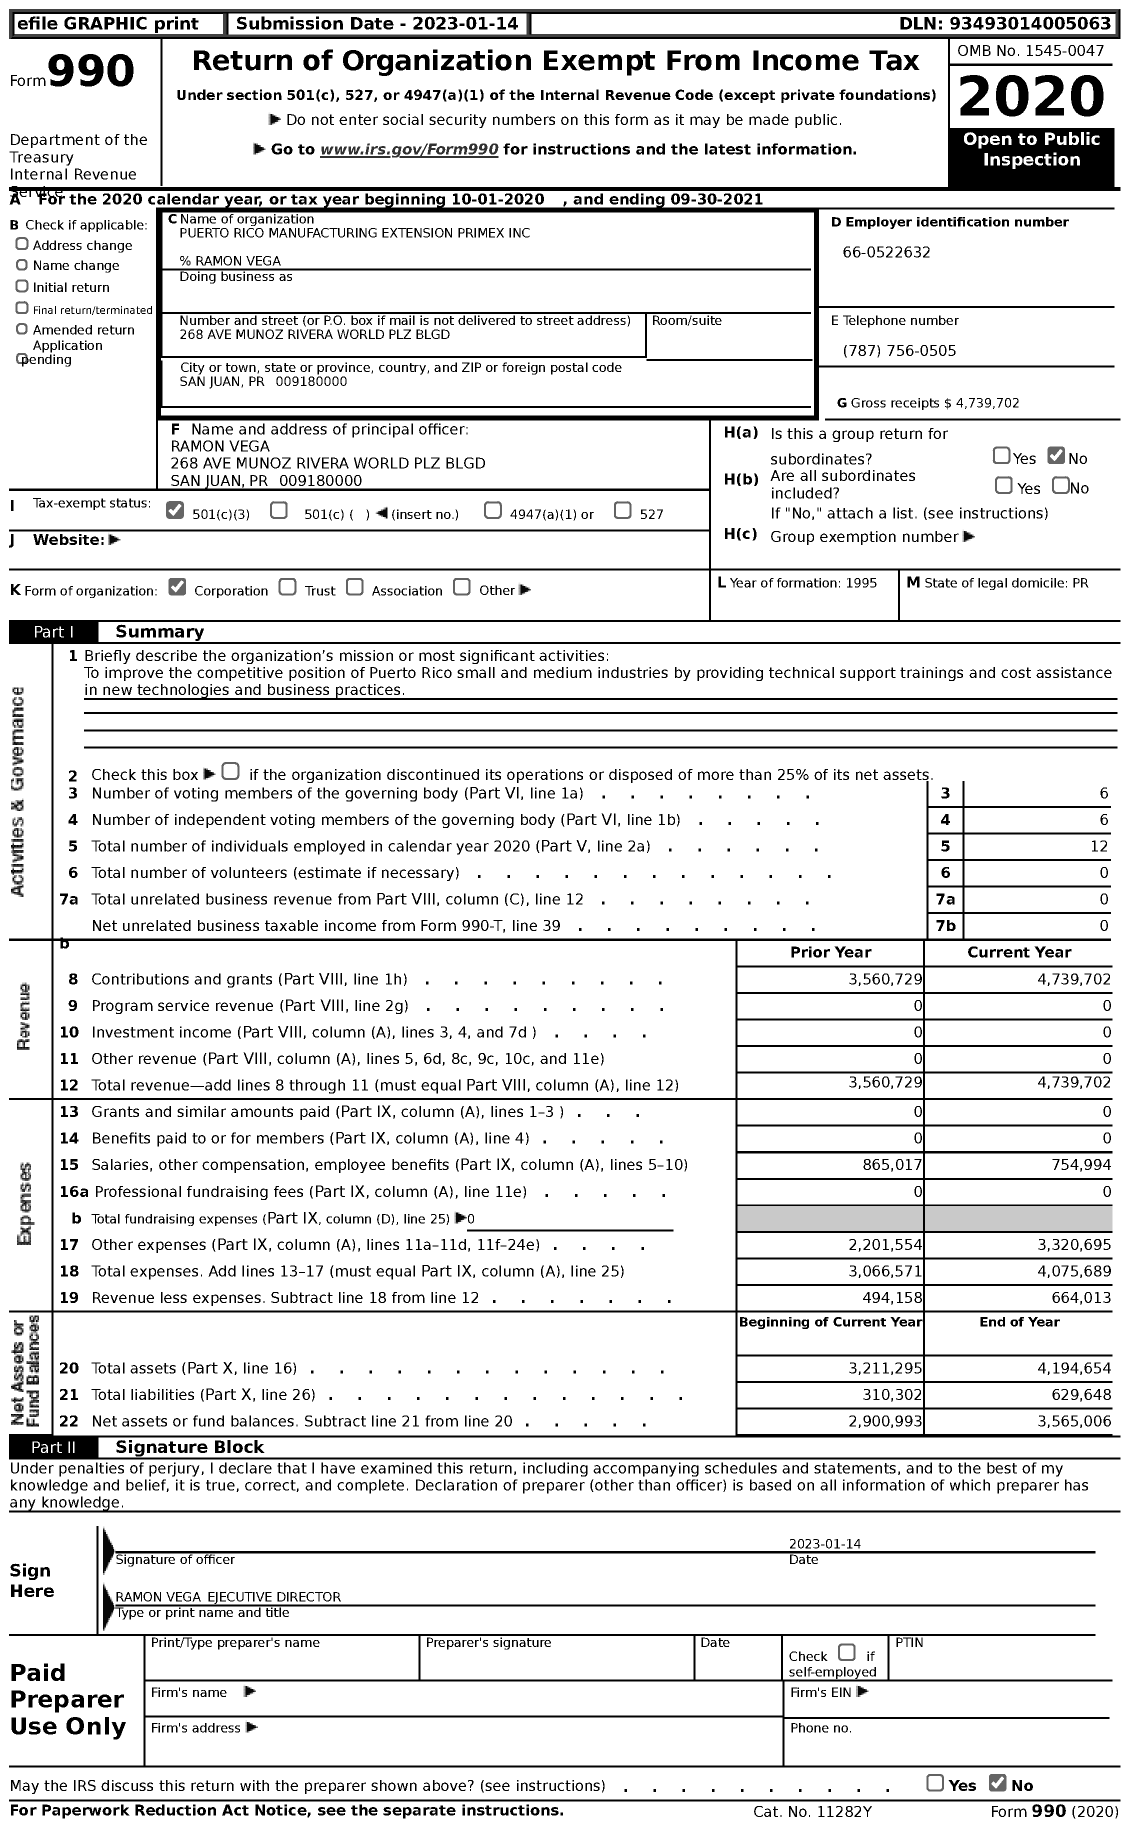 Image of first page of 2020 Form 990 for Puerto Rico Manufacturing Extension Primex